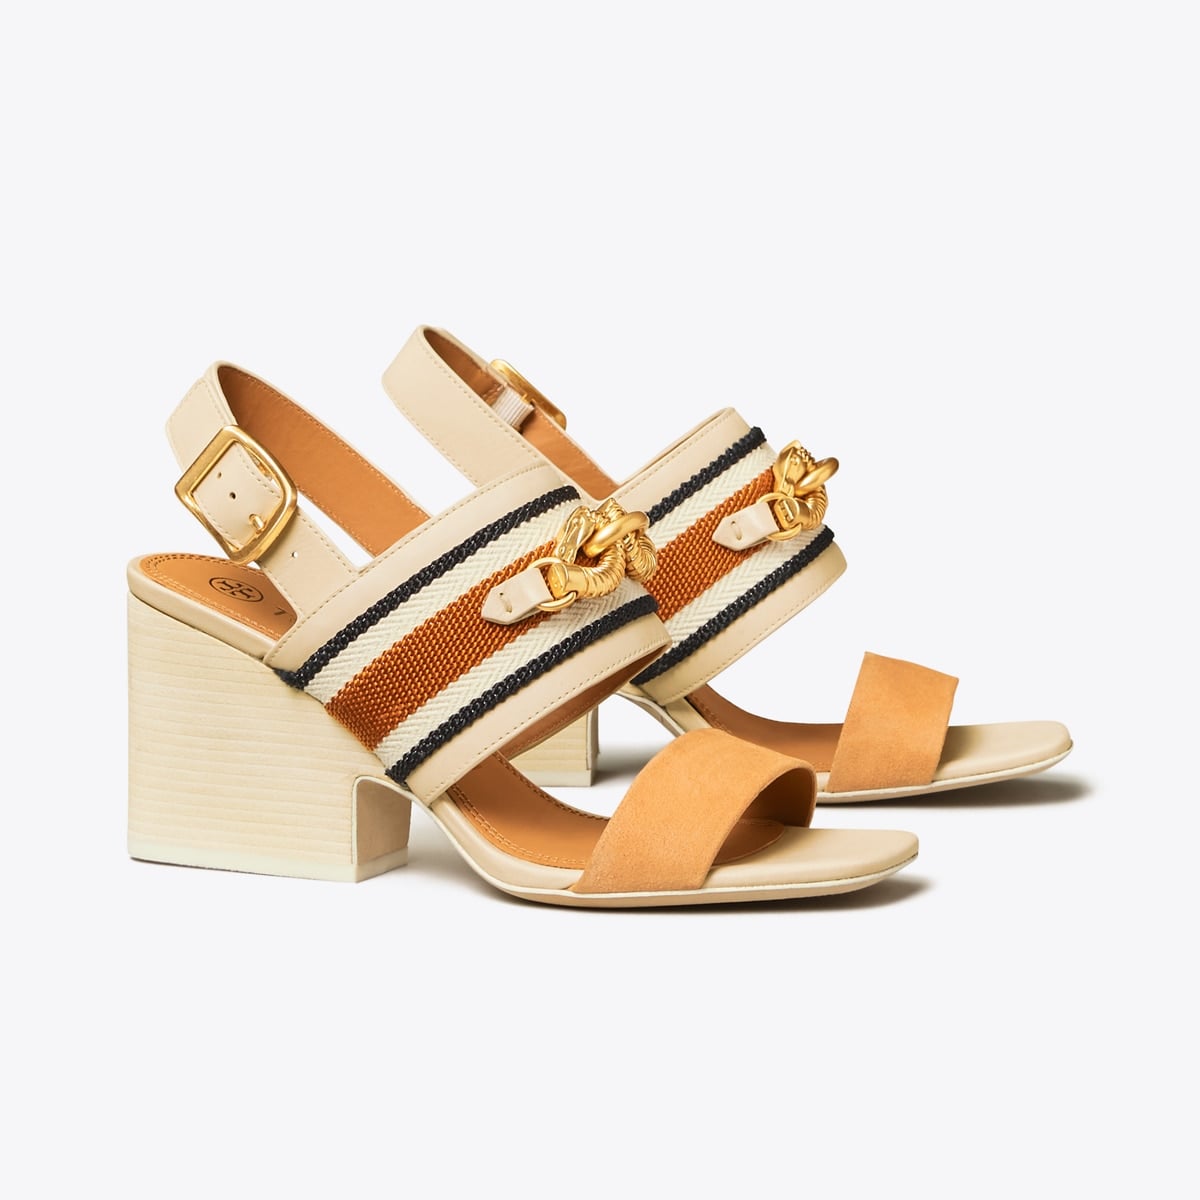 Tory Burch Jessa Block Heel Sandals | Calling All Shoppers: 70 Crazy-Good  Deals From the Best July Sales Online | POPSUGAR Fashion Photo 59